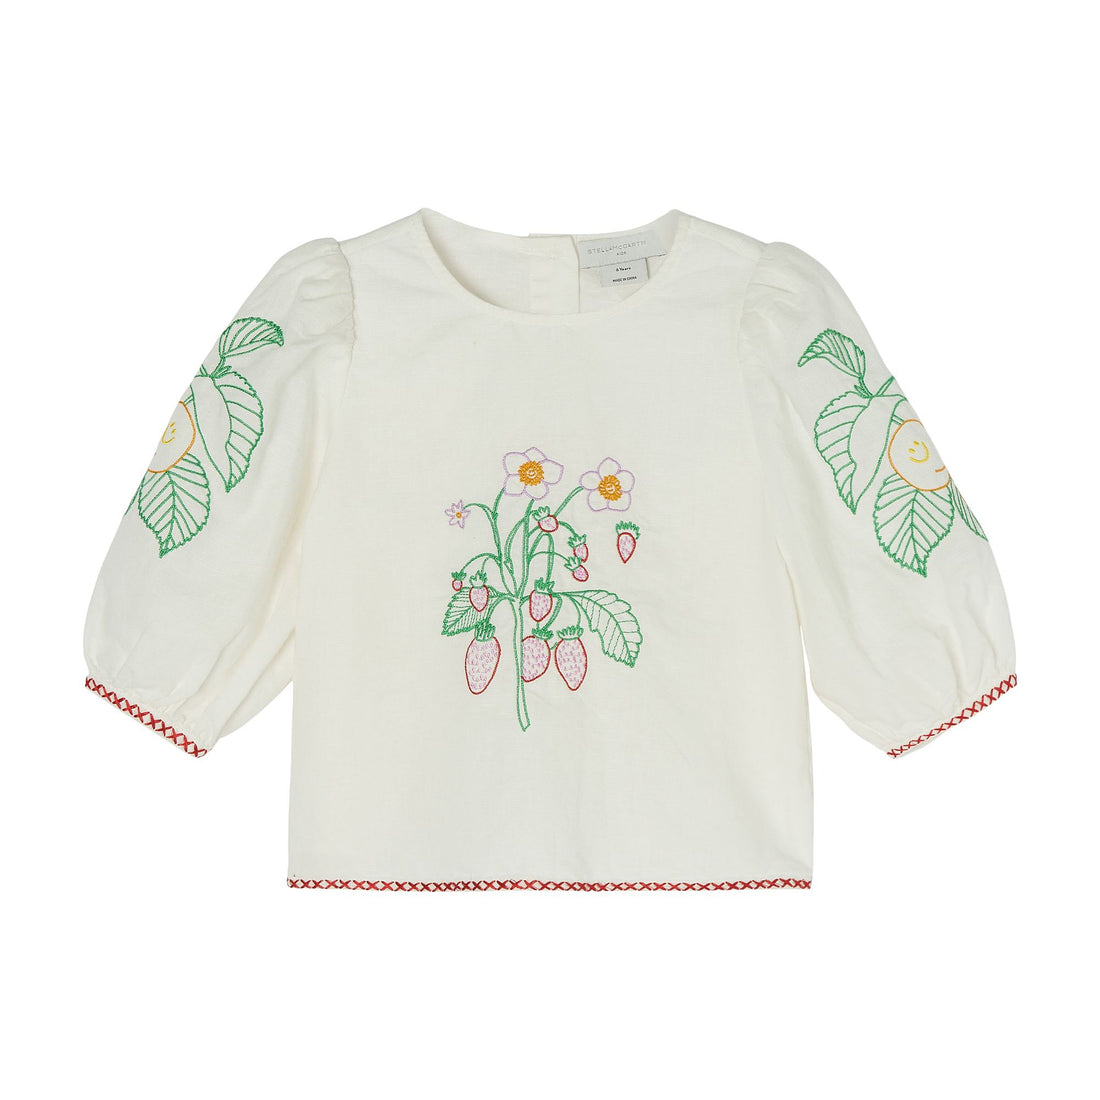 floral embroidered top